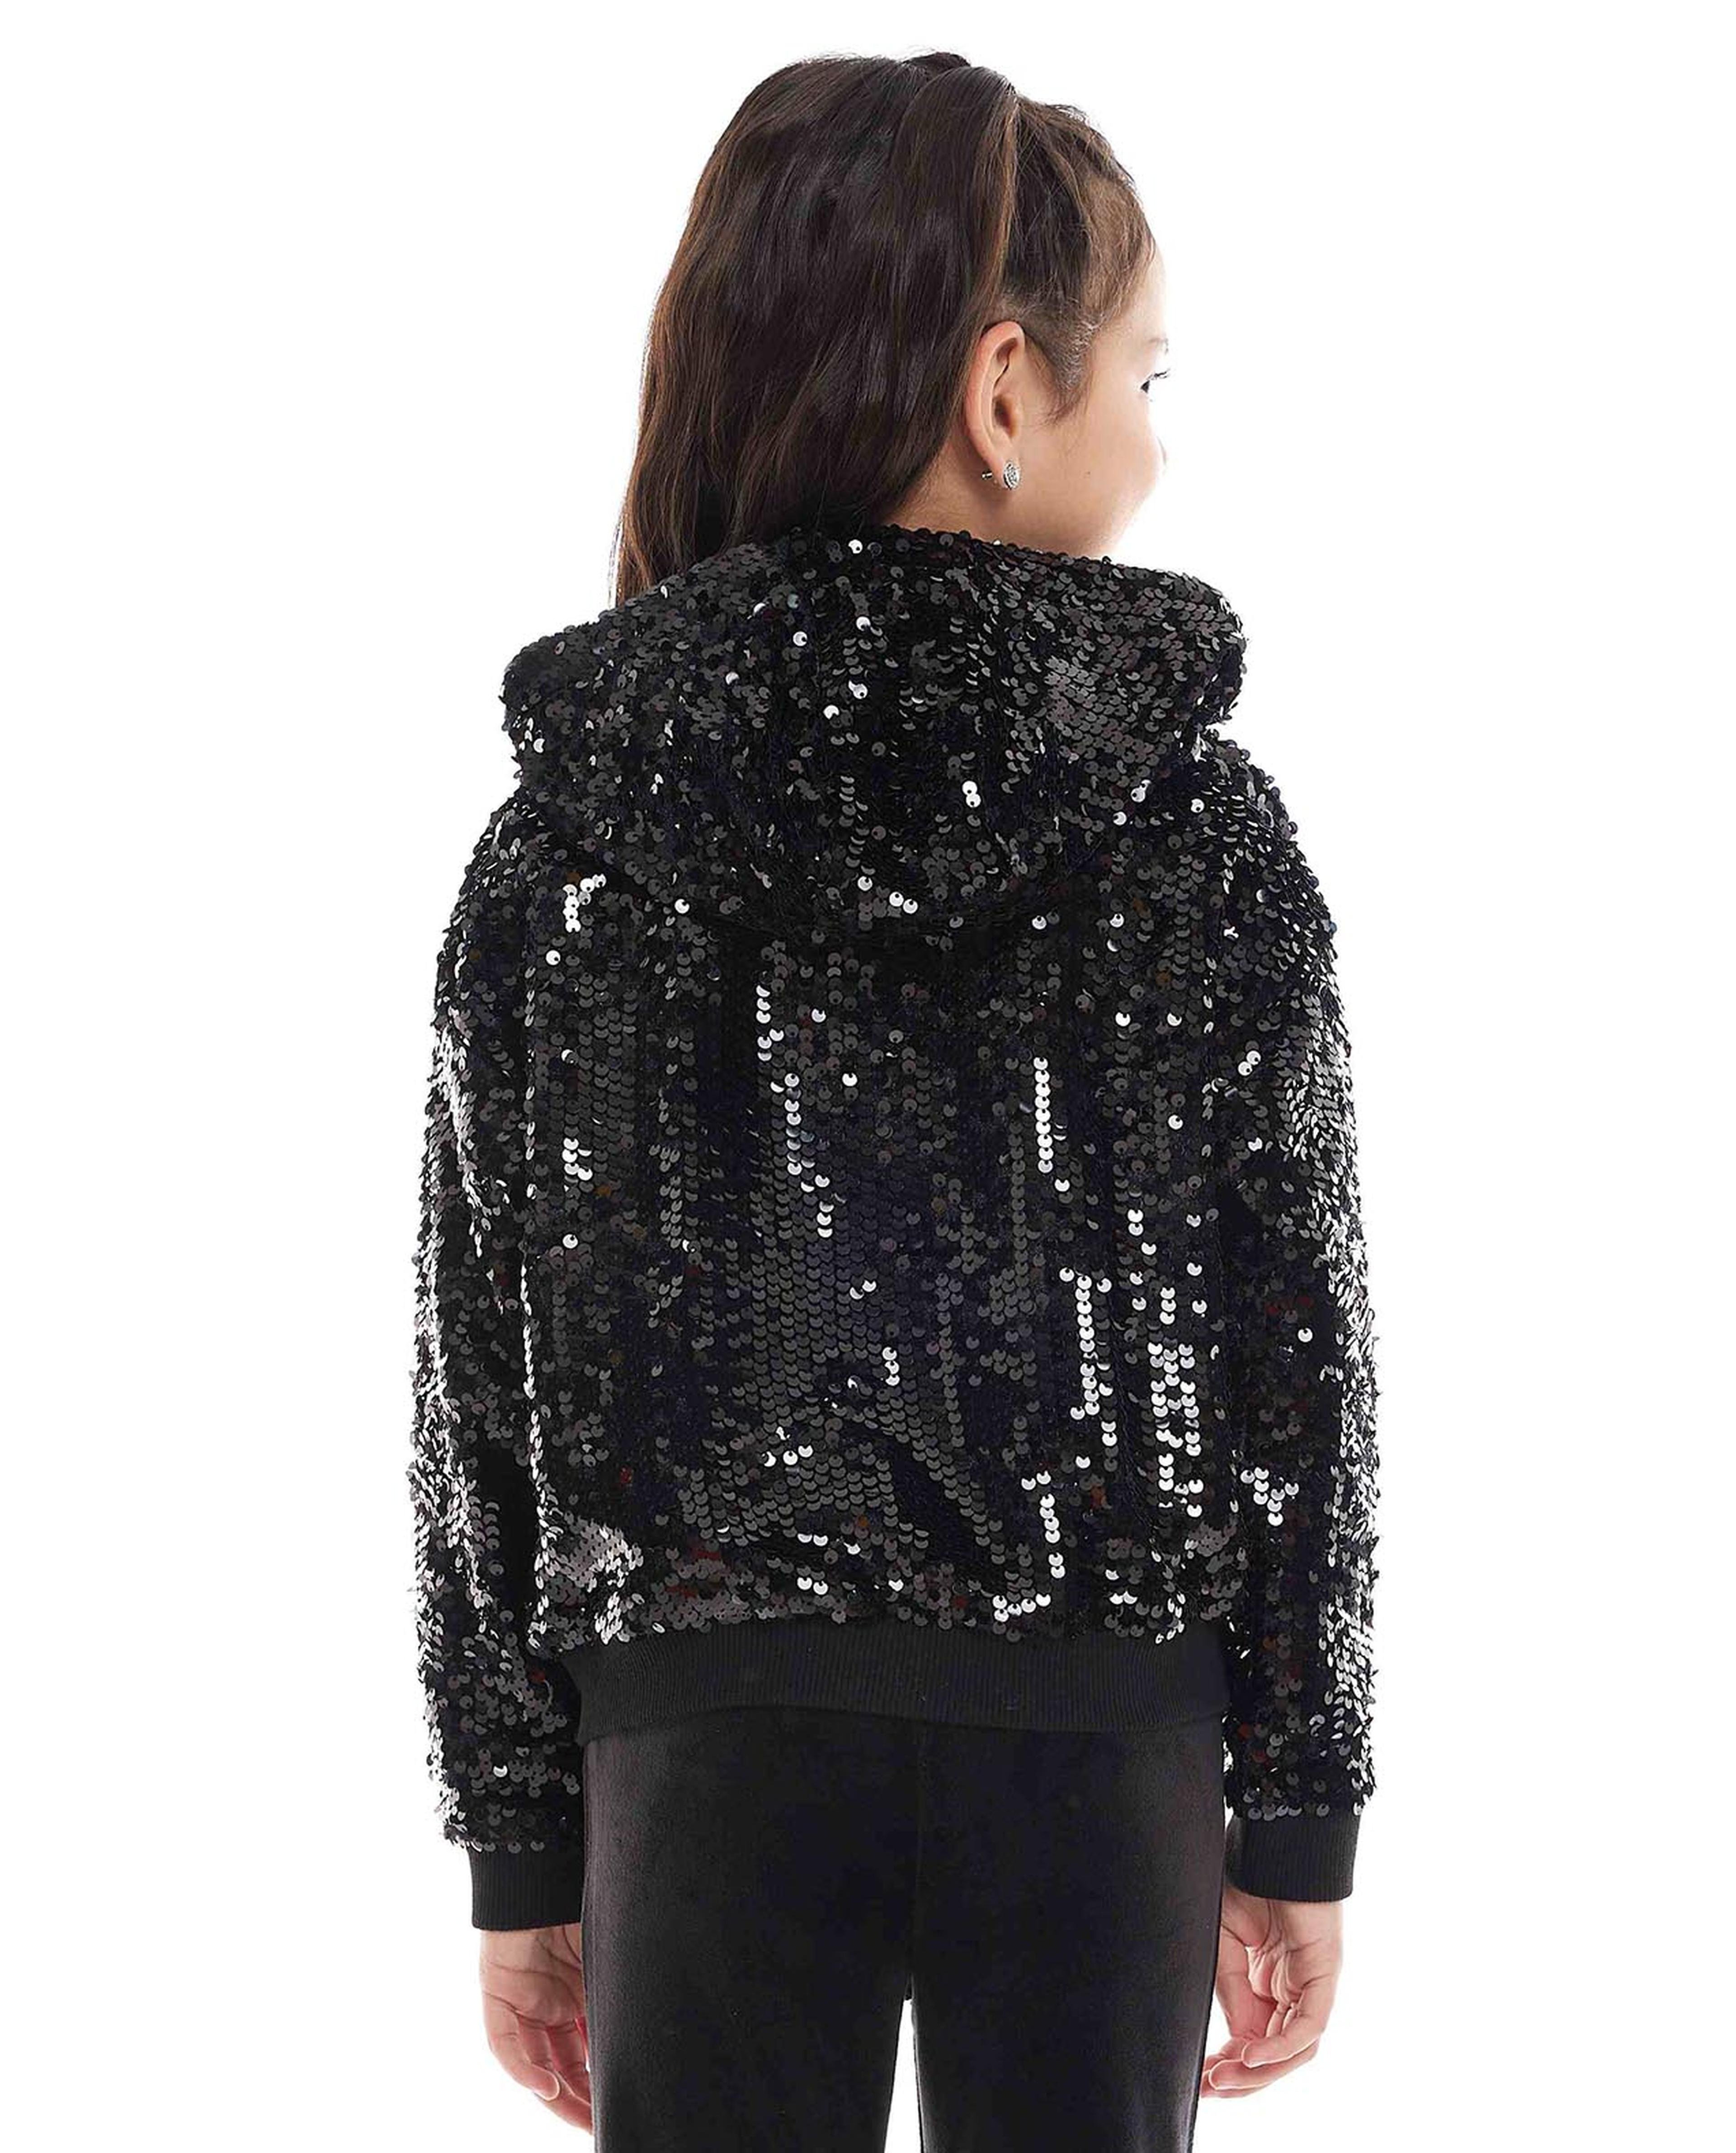 Sequined Hooded Jacket with Zipper Closure